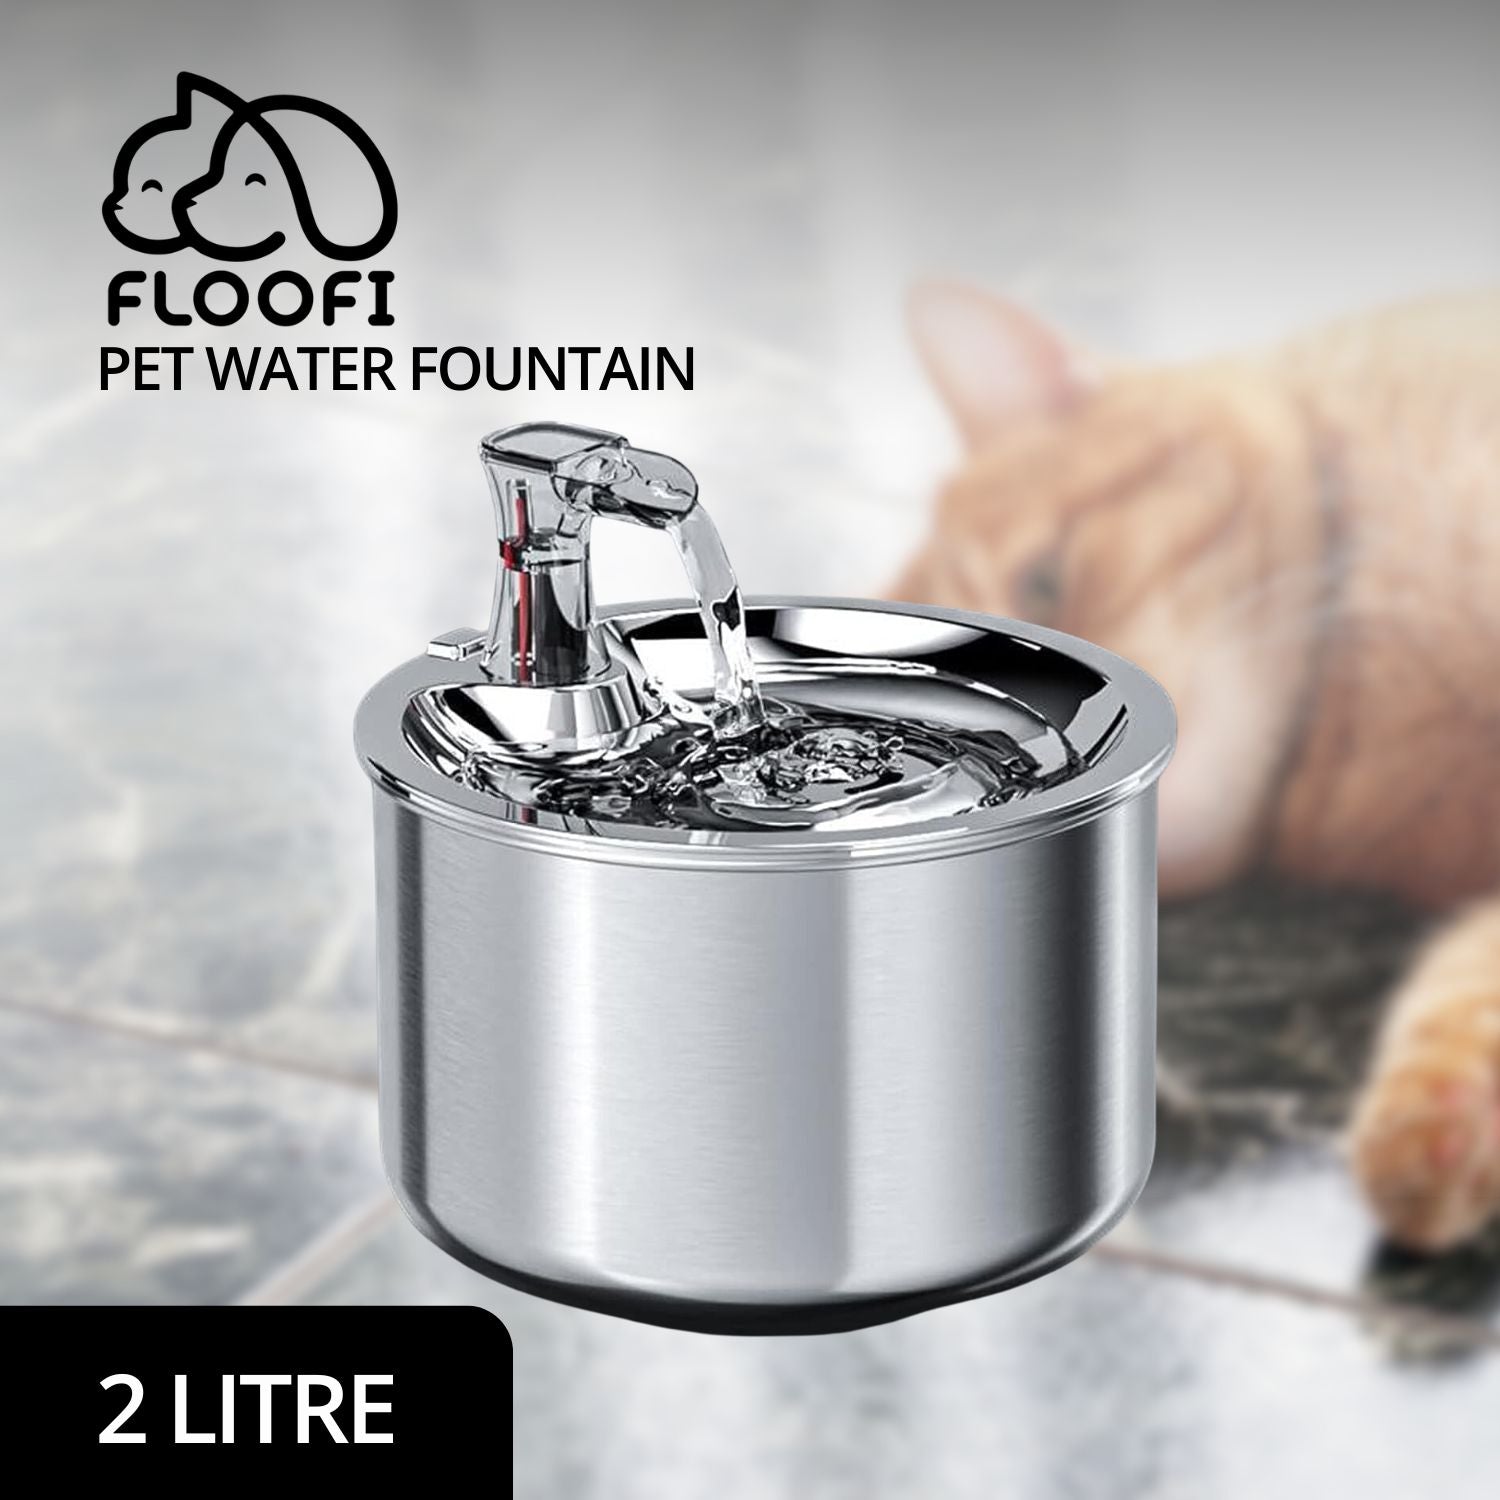 FLOOFI 2L Stainless Steel Pet Water Fountain for Cats and Small Dogs